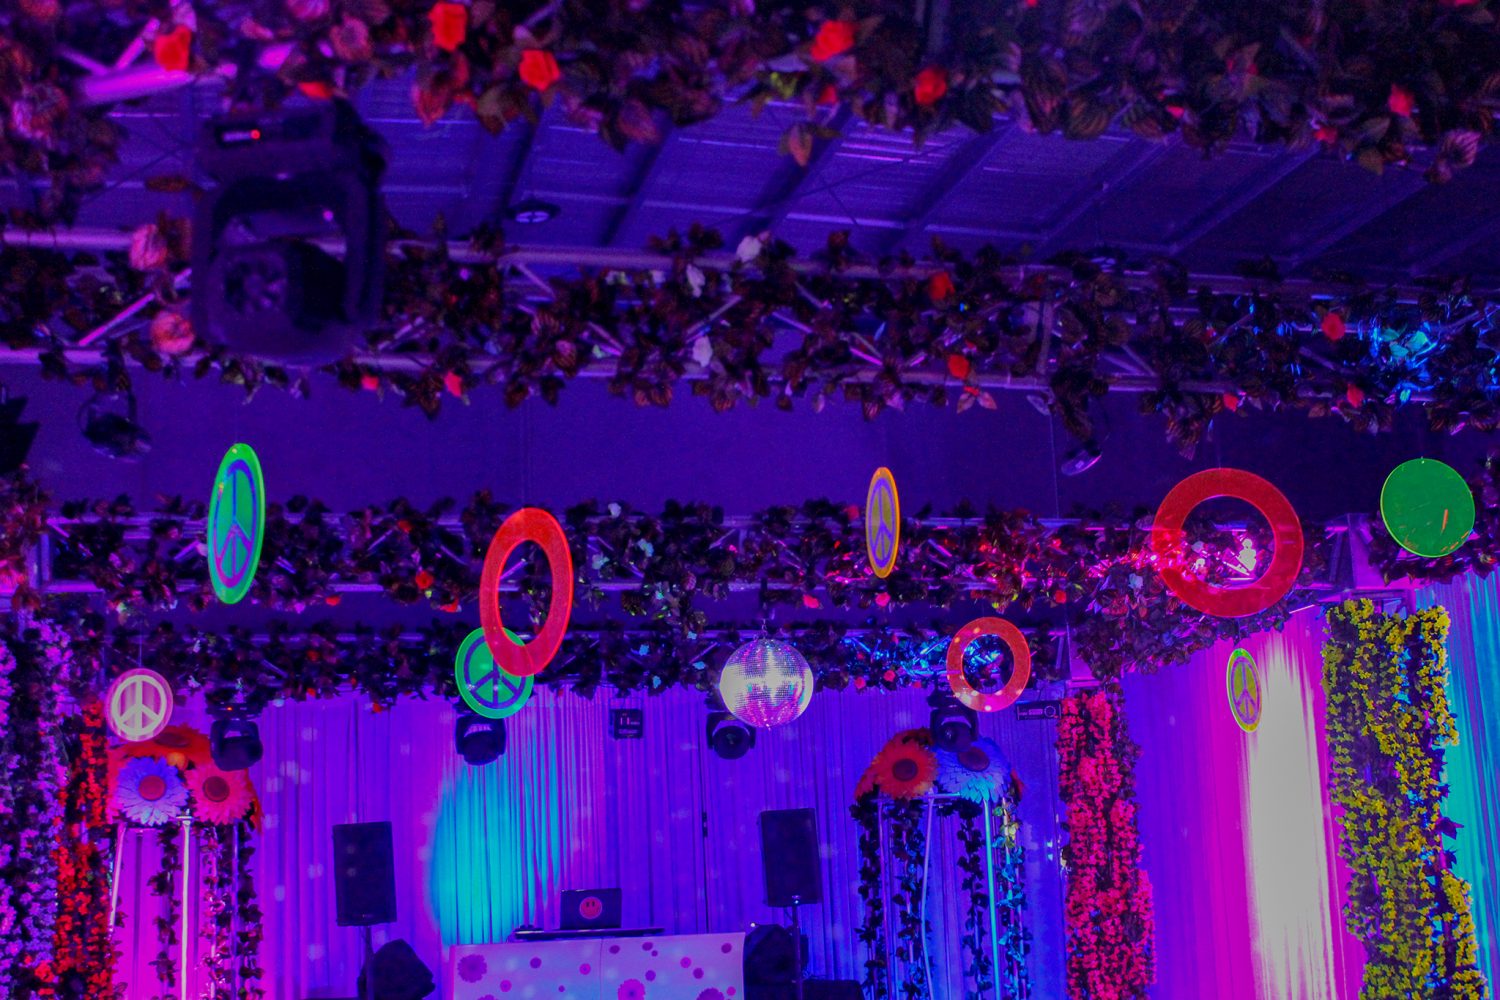 60 S Theme Party Equipment Hire Feel Good Events Melbourne